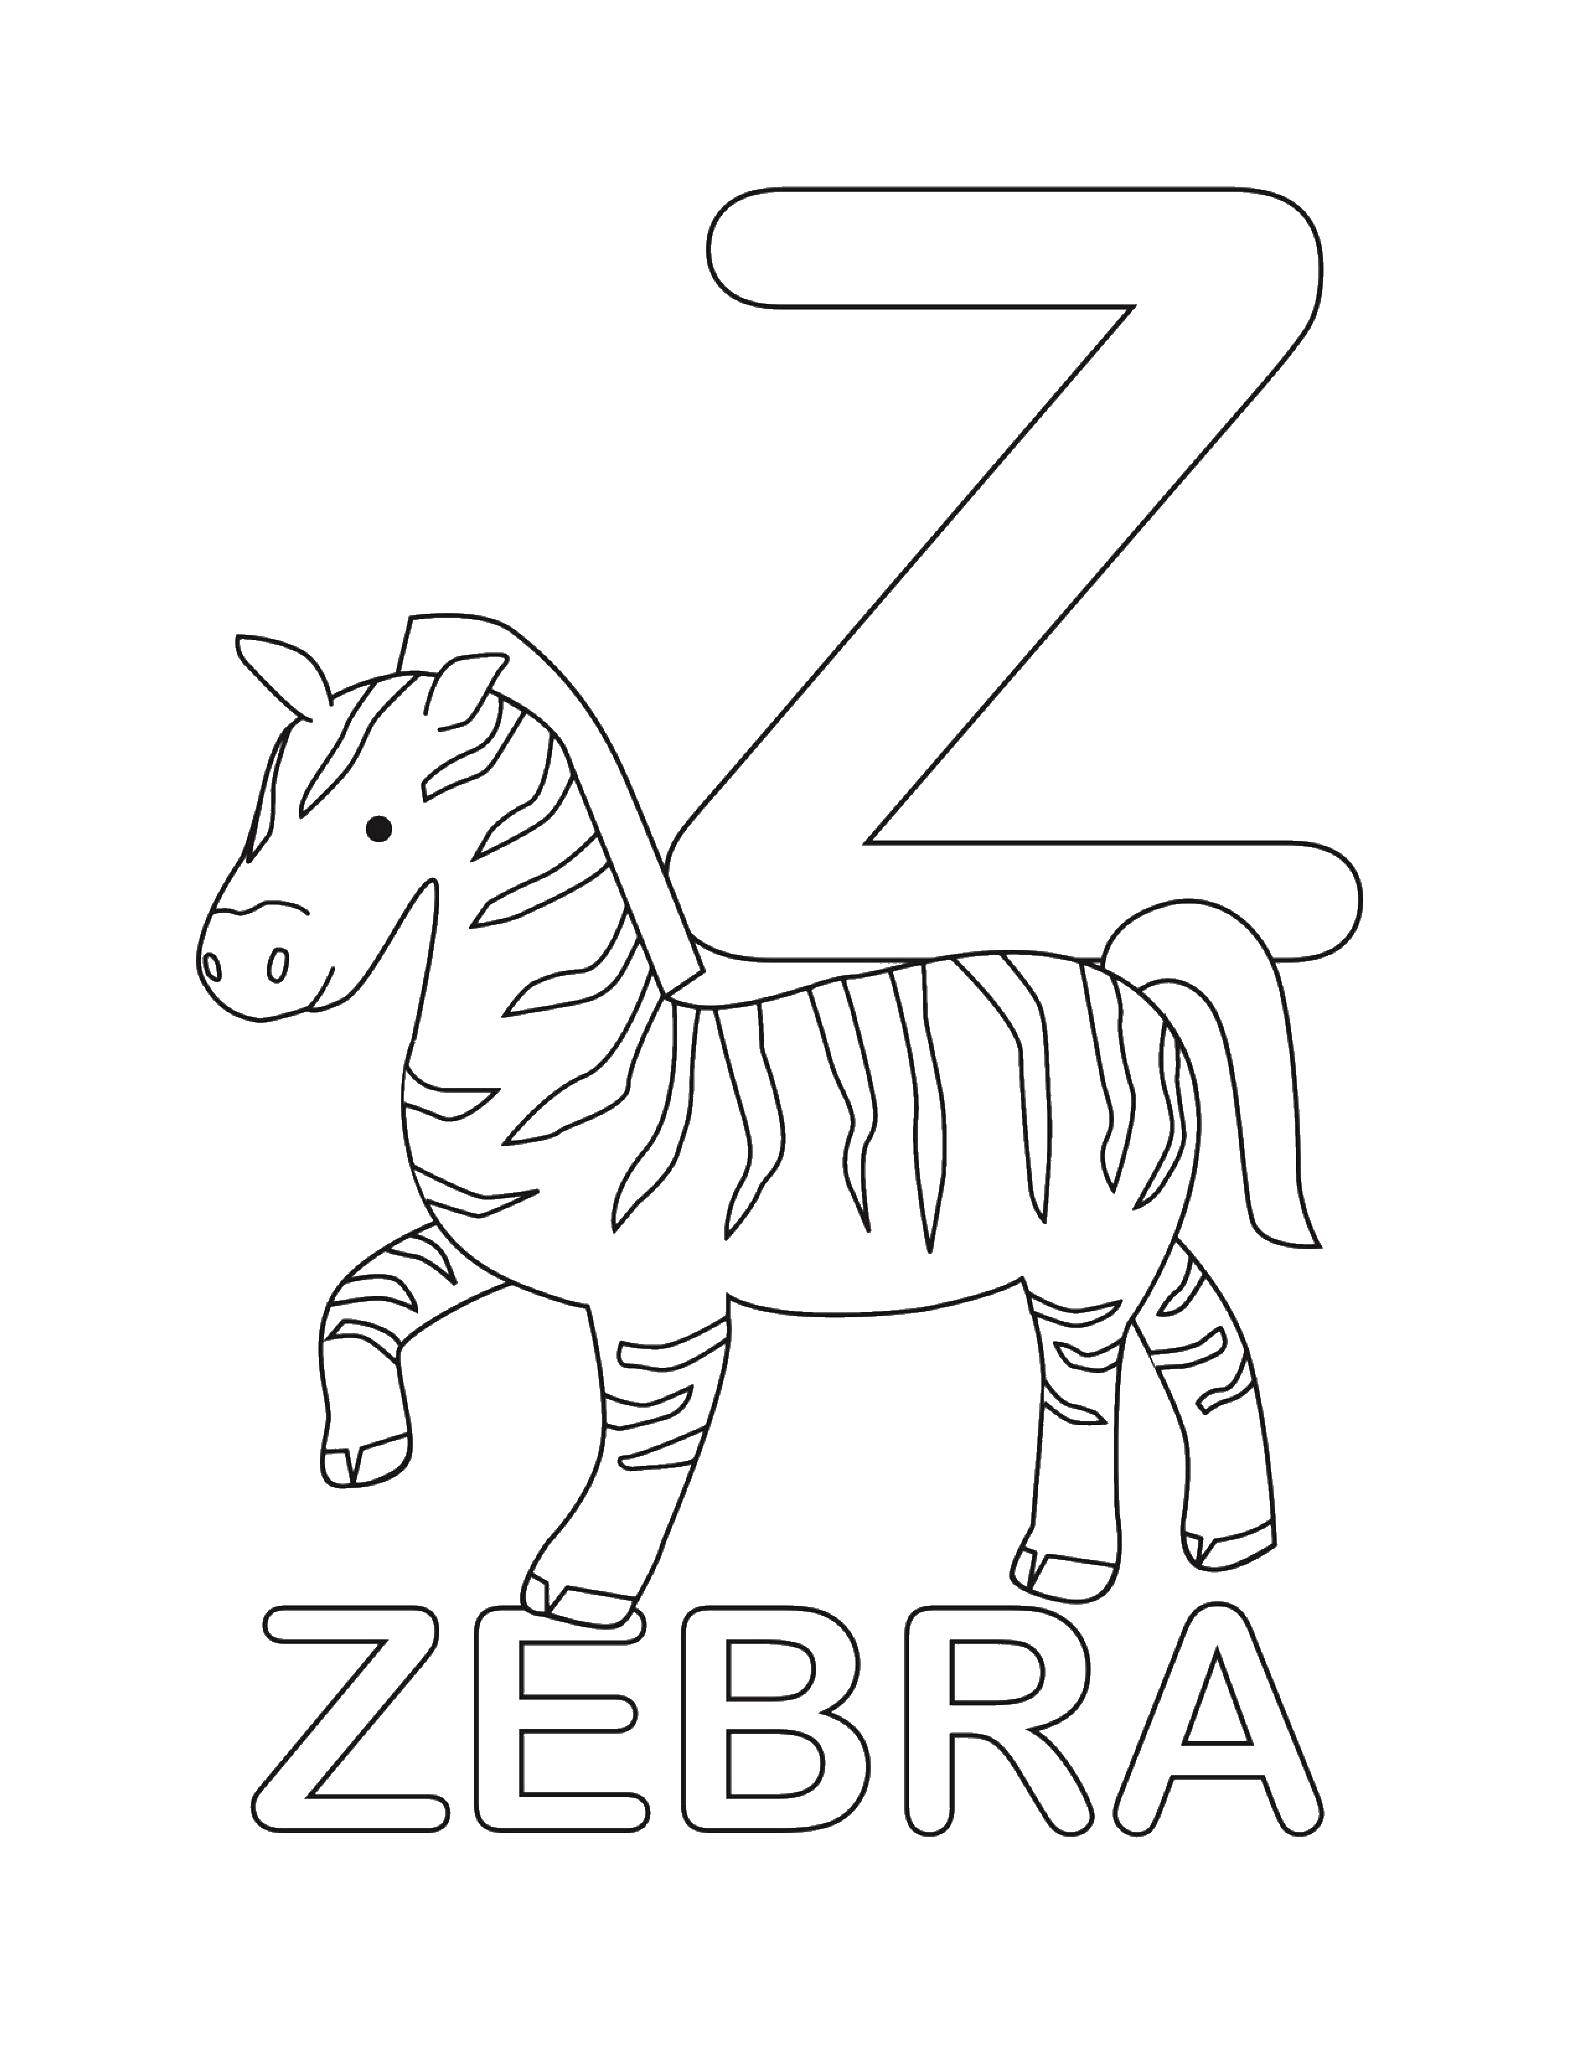 Coloring Zebra. Category English words. Tags:  the English words Zebra.